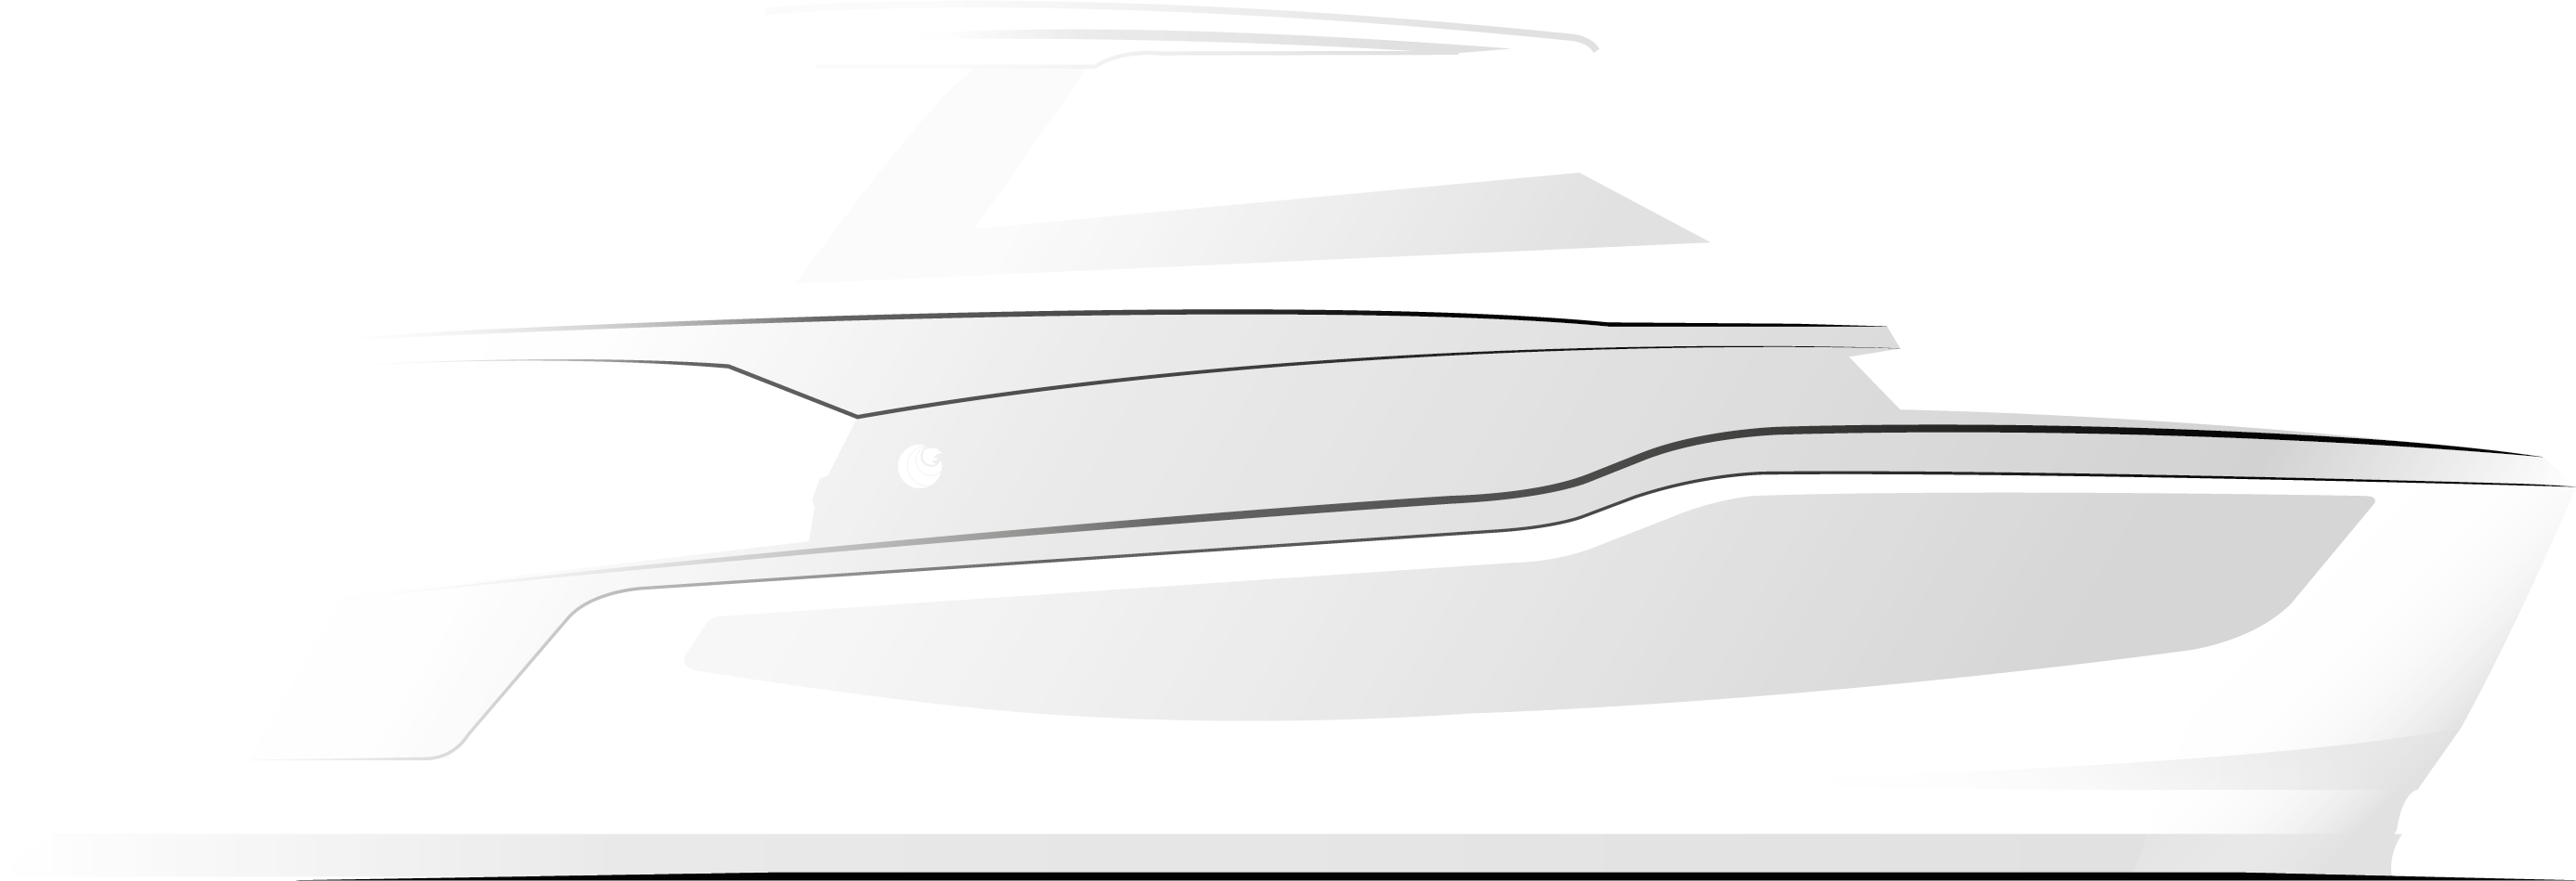 outline of the 50 yacht